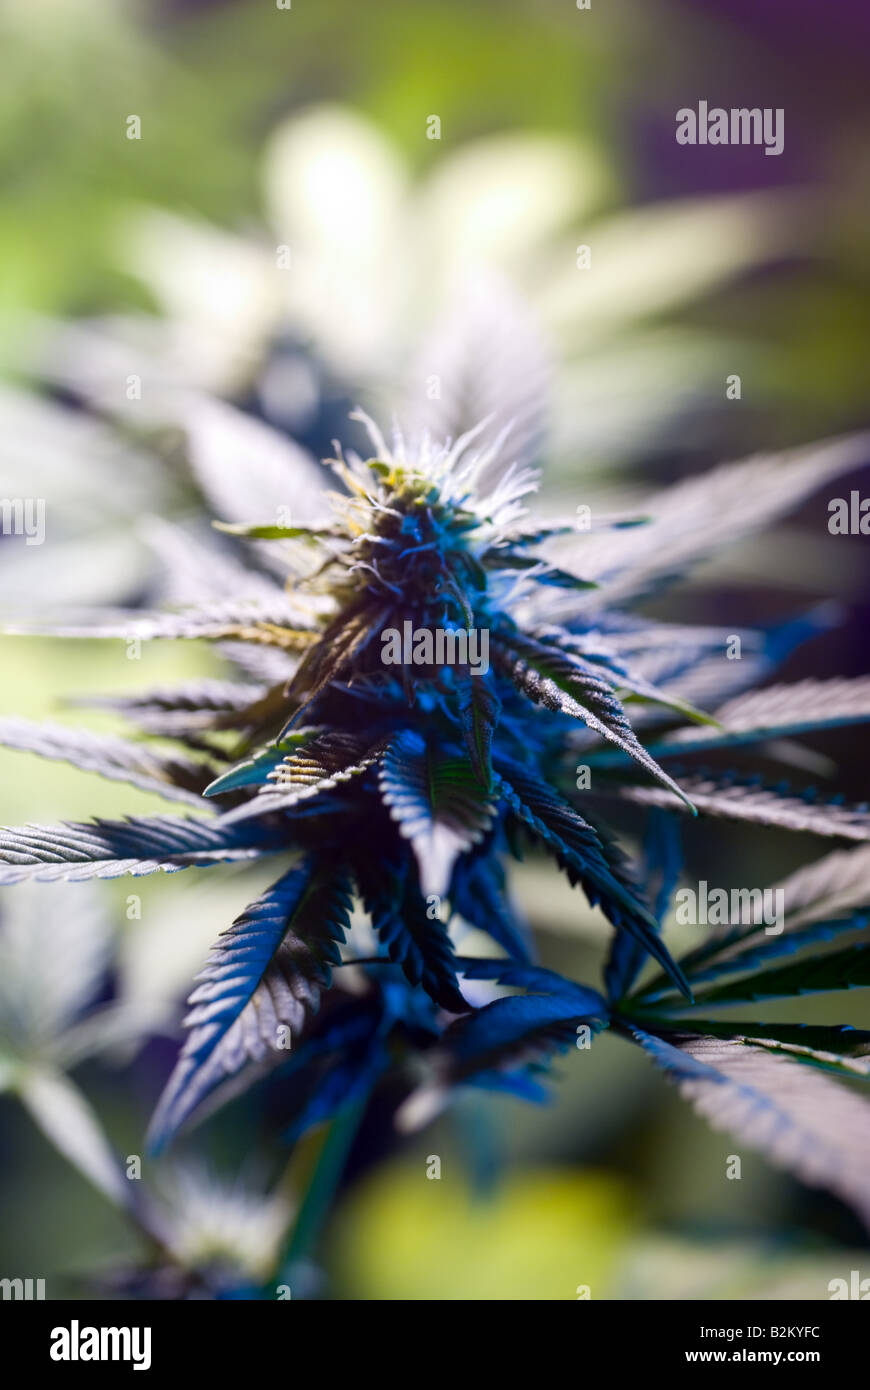 Close up of Marijuana cannabis plant flower bud in an illegal grow room in New Jersey USA Stock Photo